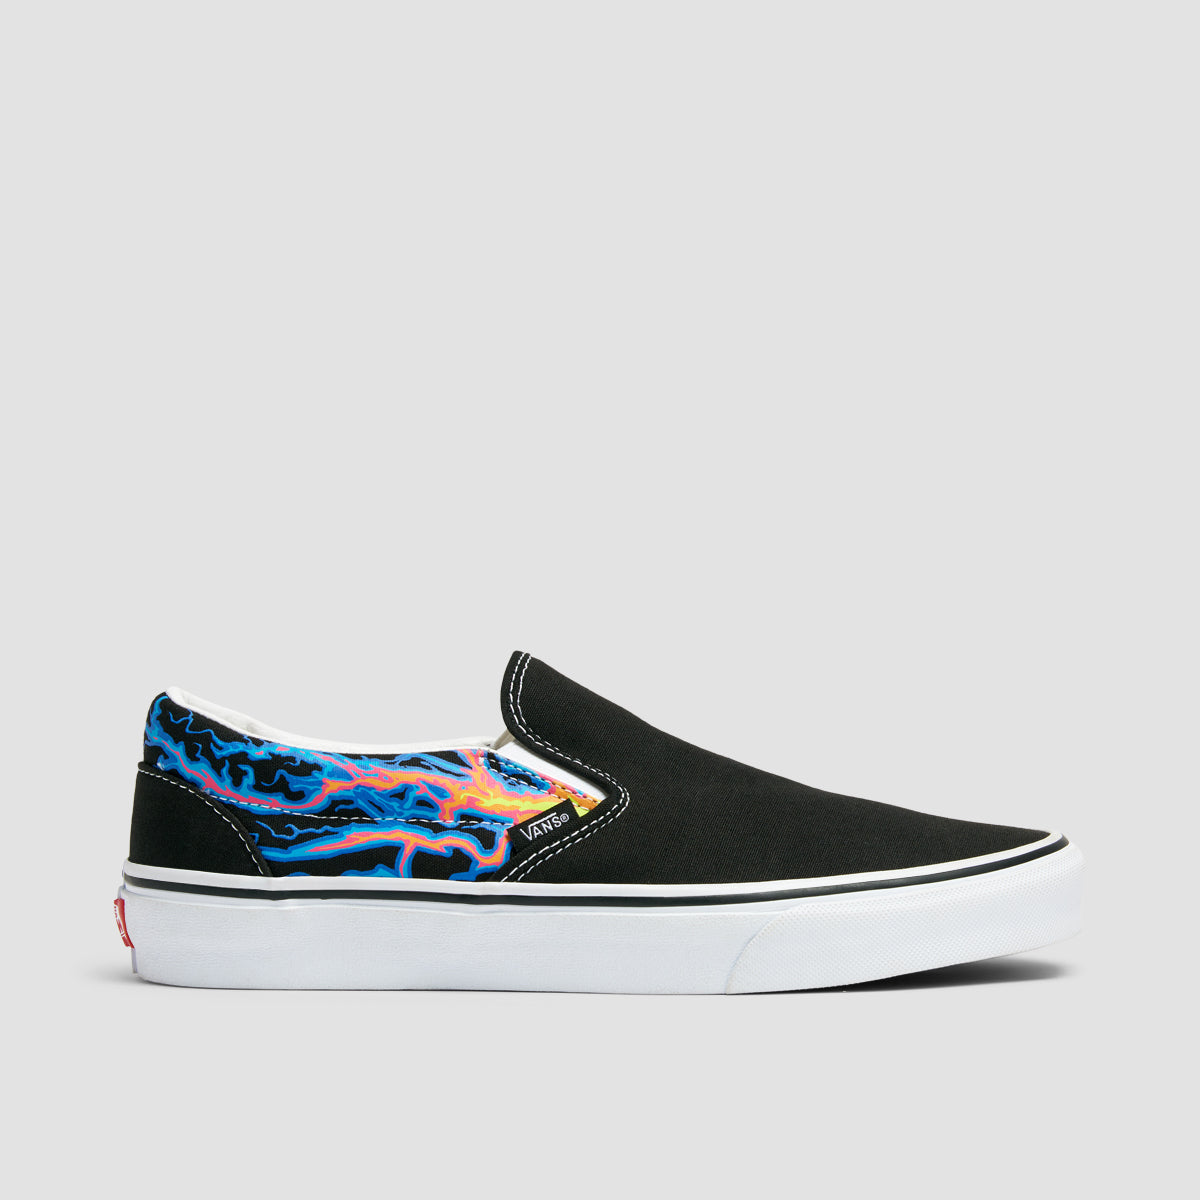 Vans Classic Slip-On Shoes - Electric Flame Black/True White